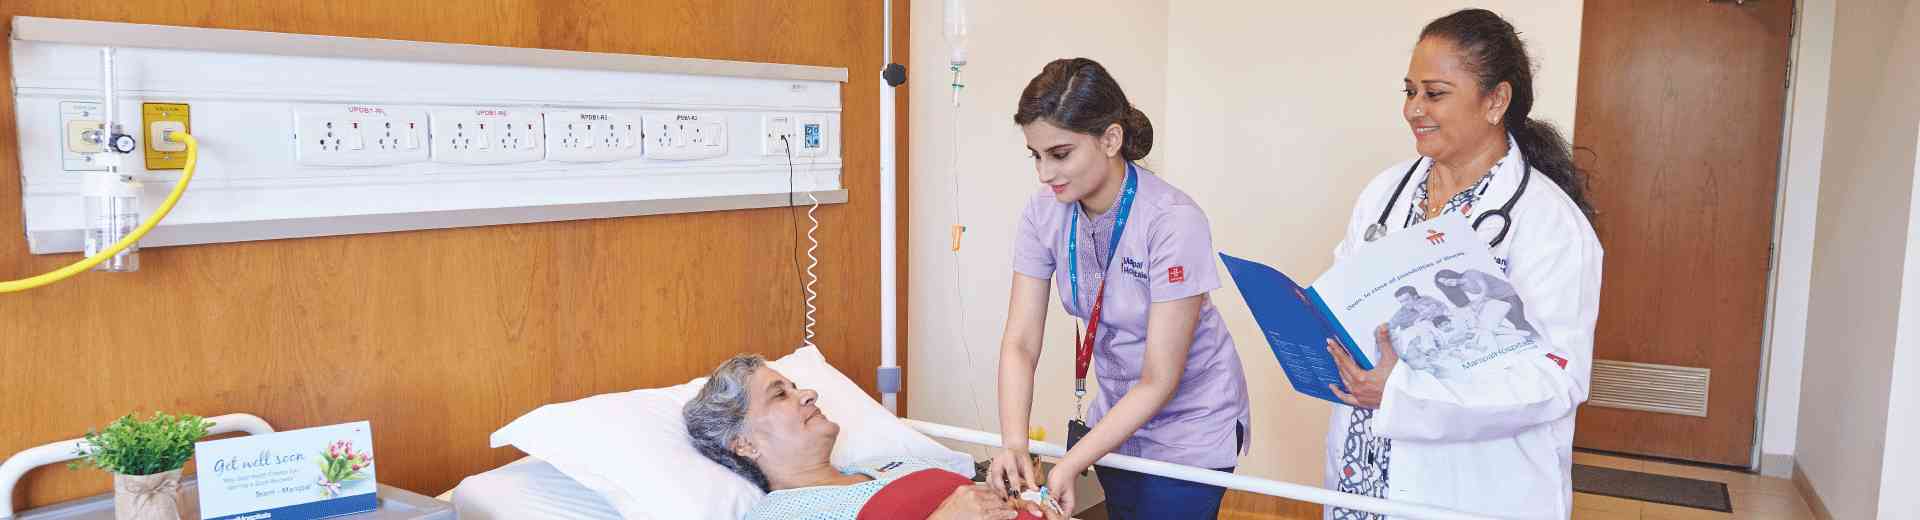 Outpatient Inpatient and Emergency services in Delhi